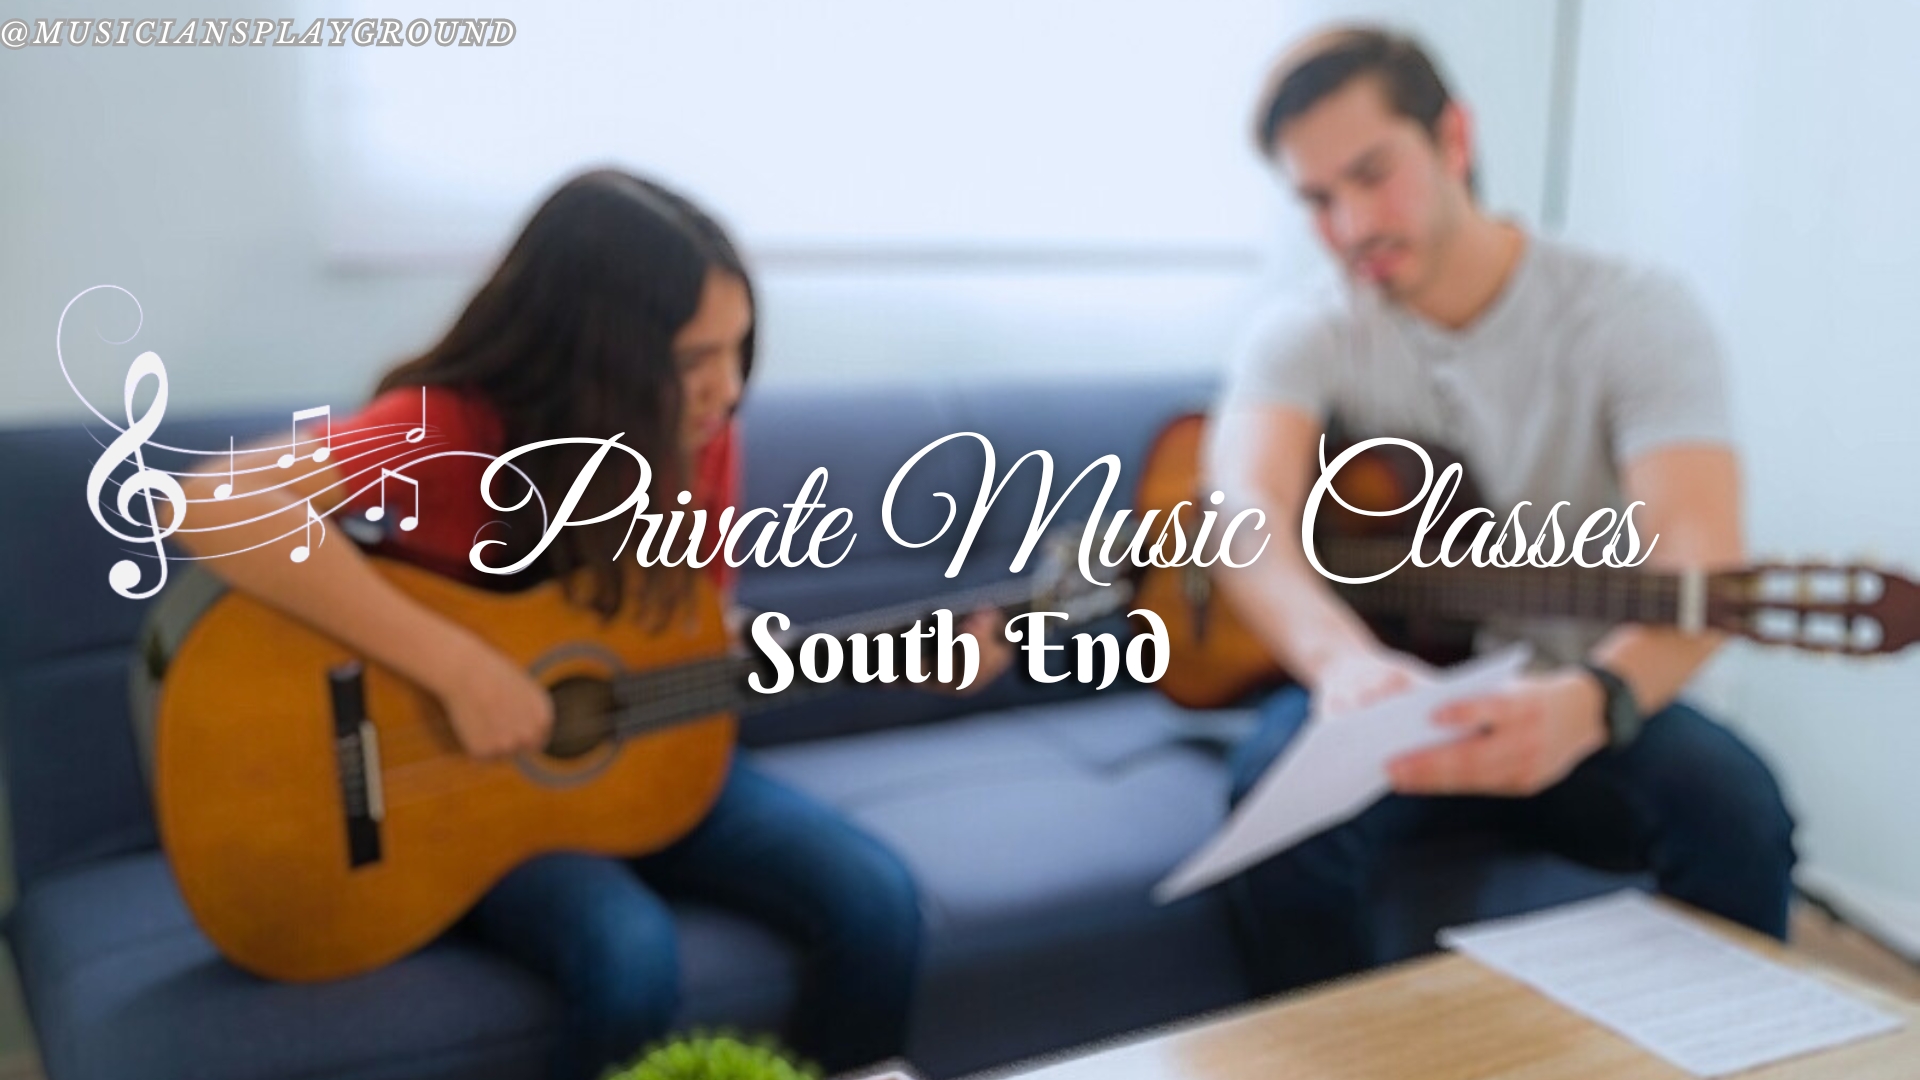 Welcome to Private Music Lessons in South End, Massachusetts